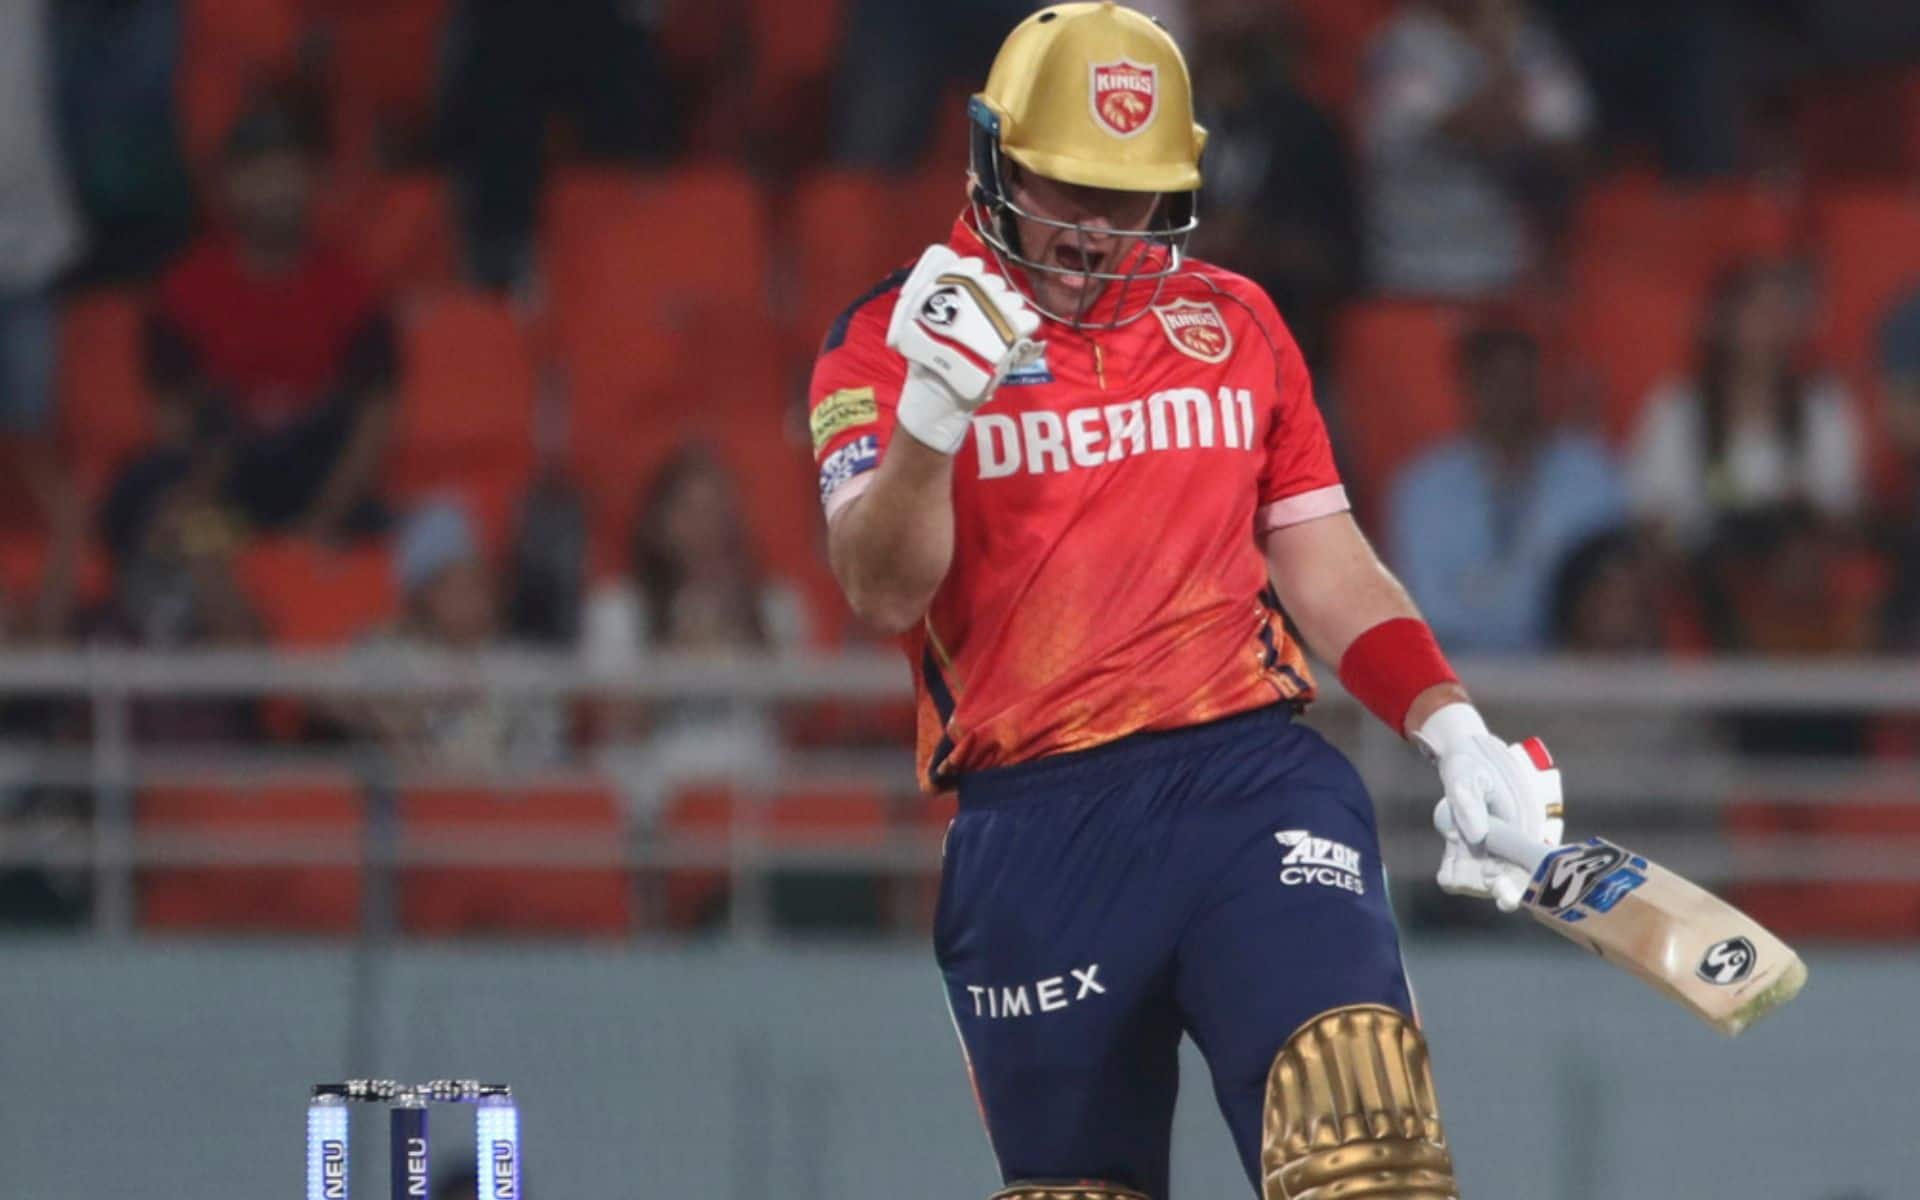 Liam Livingstone could be an impactful pick for the fantasy contests of the game [iplt20.com]